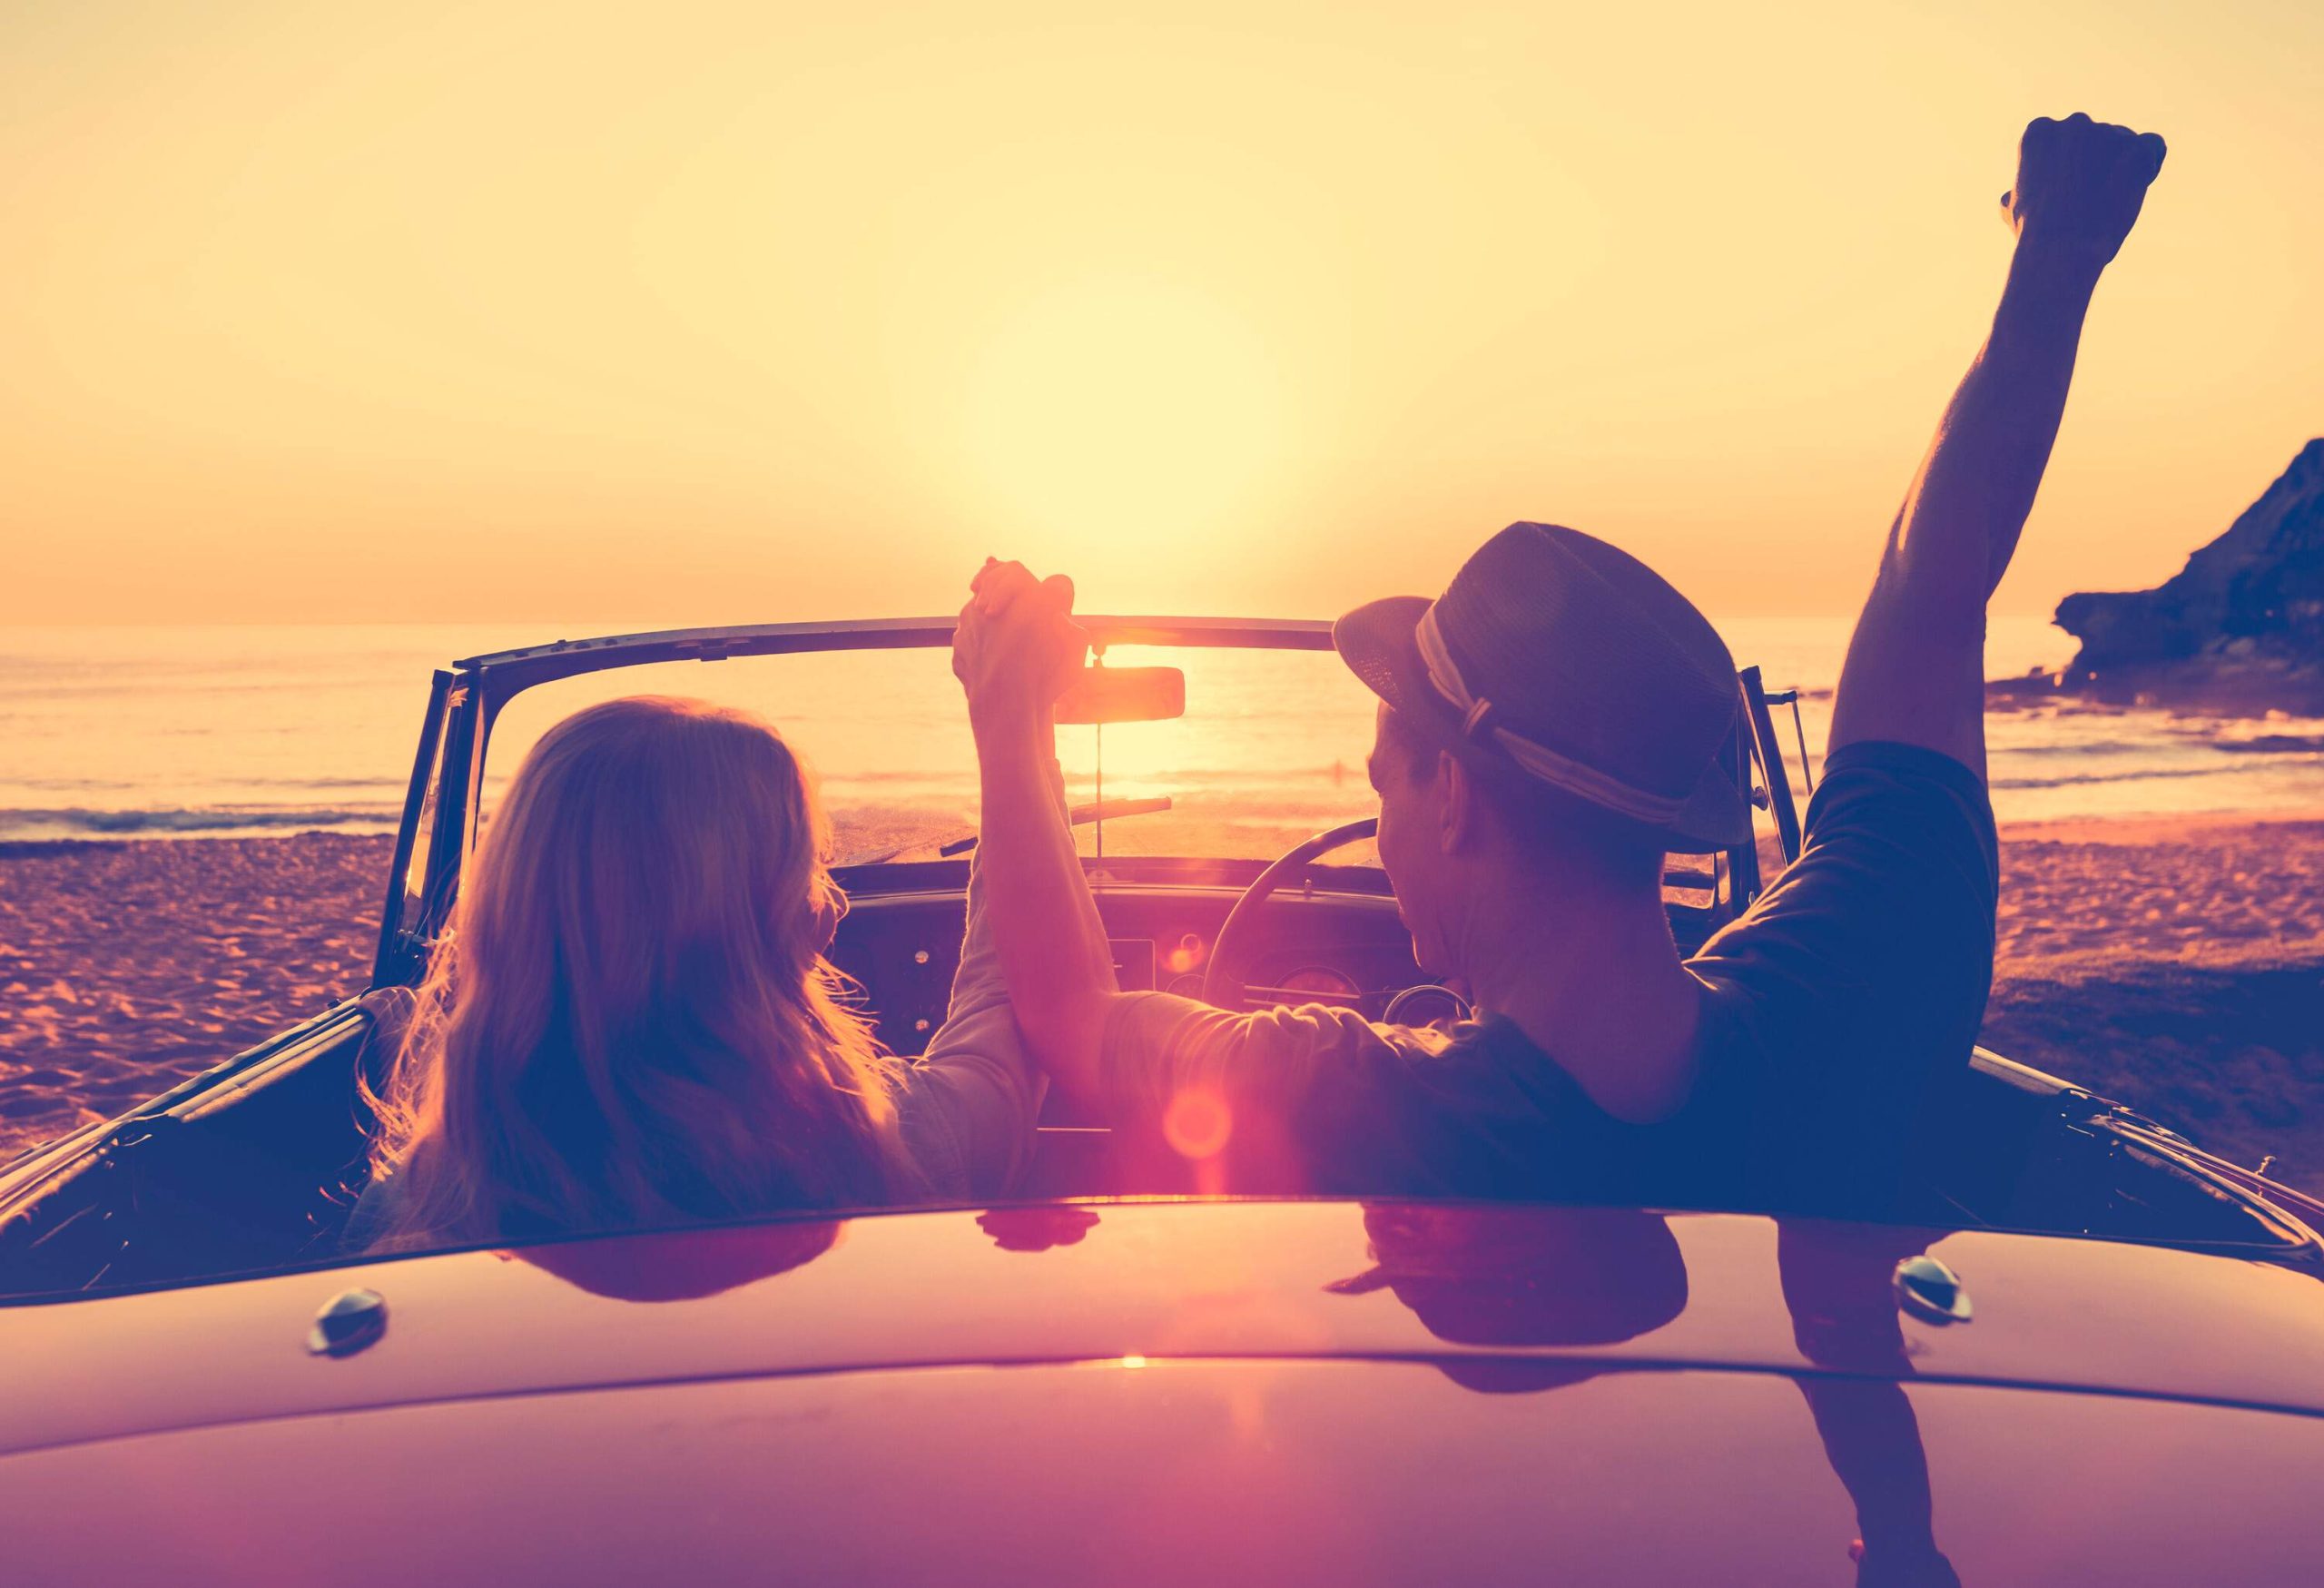 Rear view of a happy couple in a convertible car parked on the beach, holding hands, raising their hands while watching the scenic sunset.